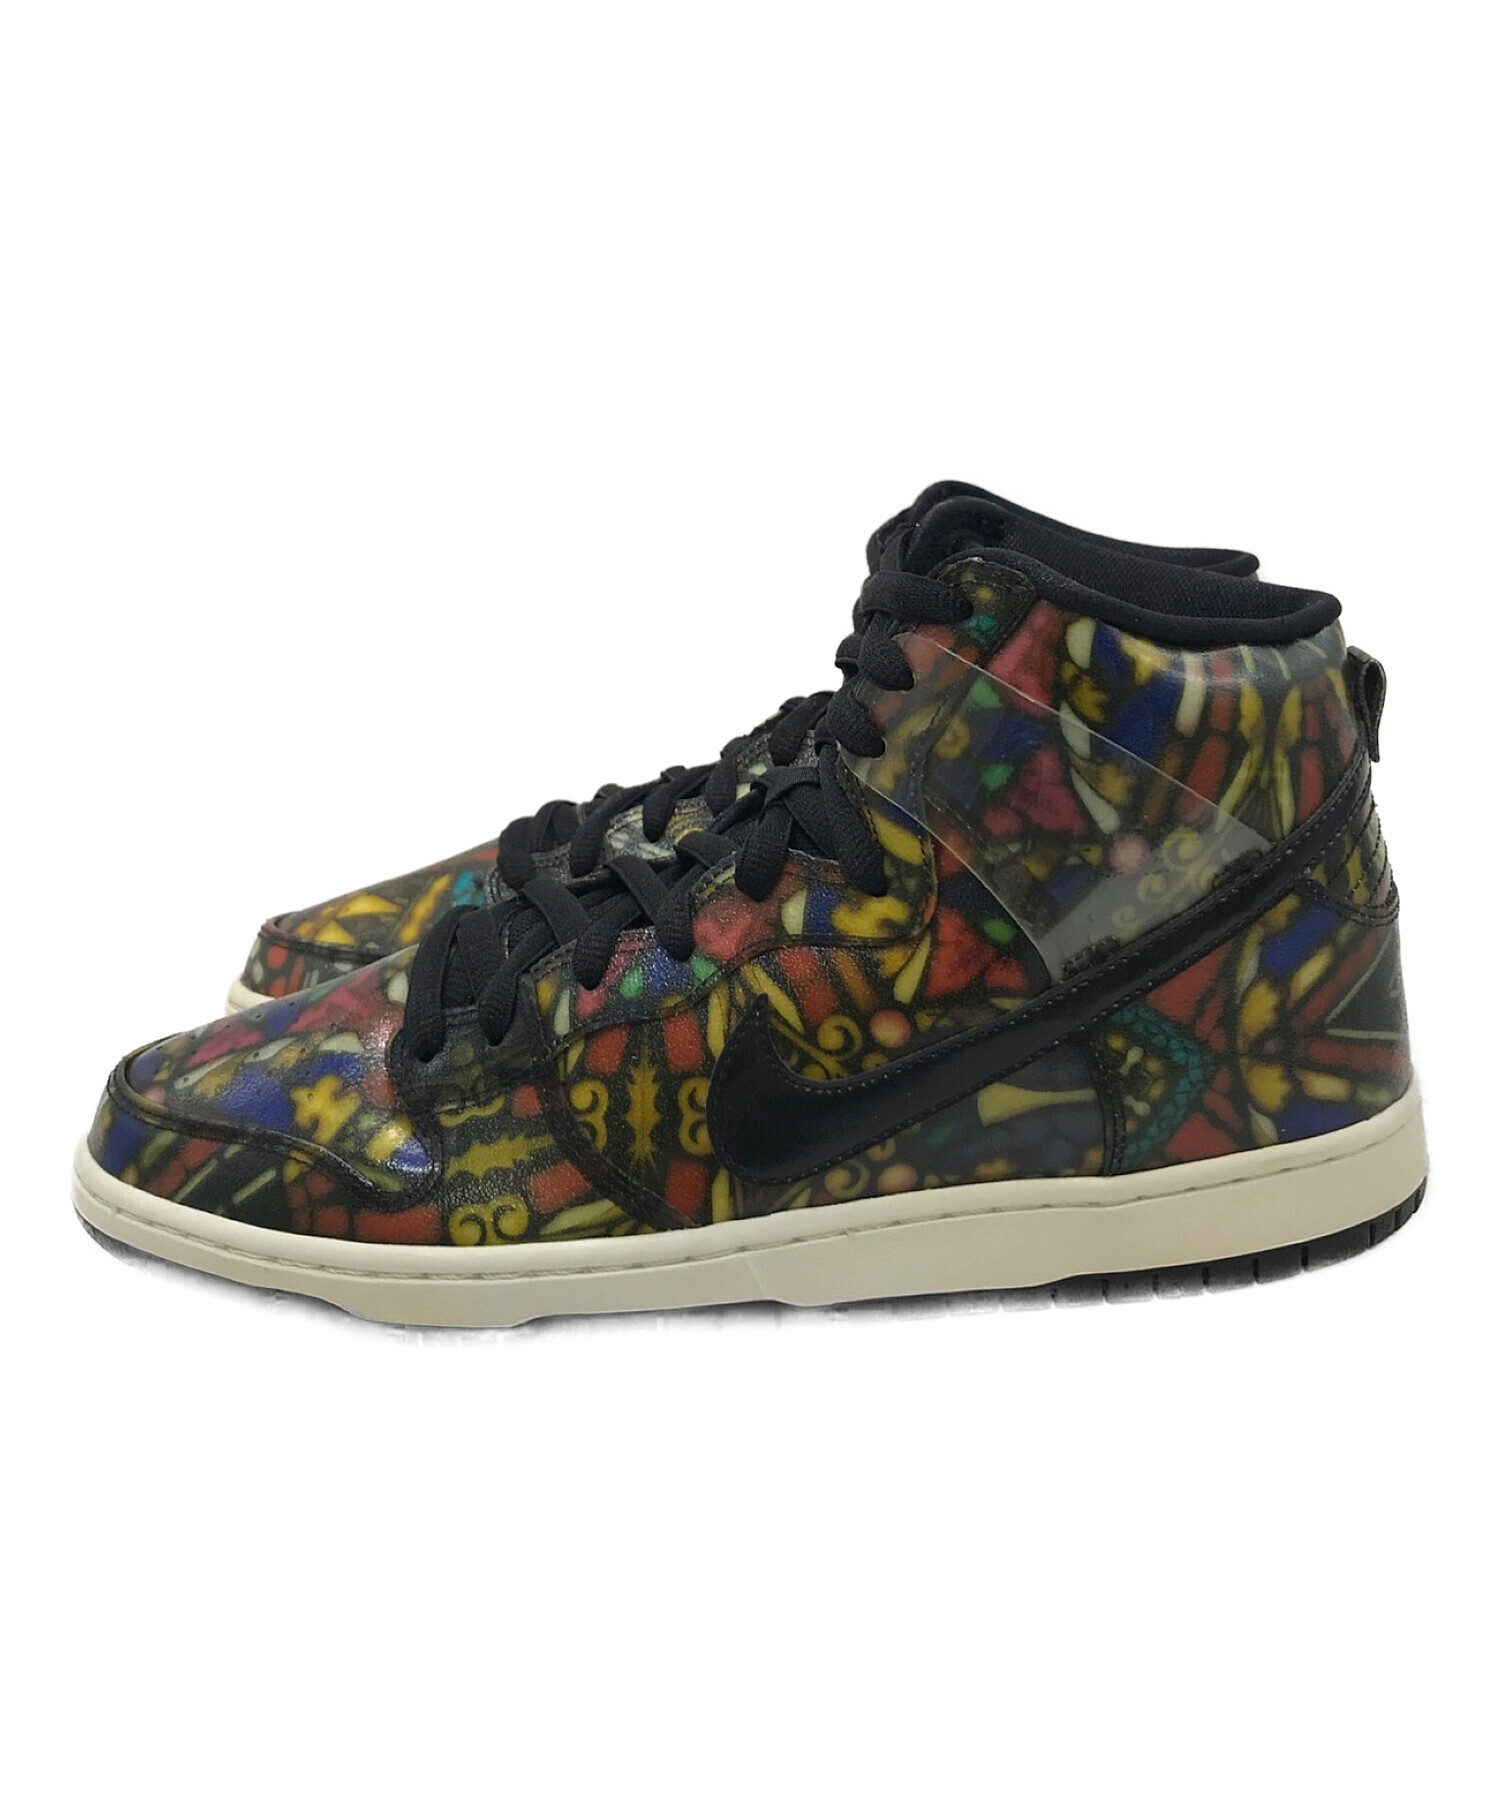 NIKE CONCEPTS DUNK HIGH SB STAINED GLASS